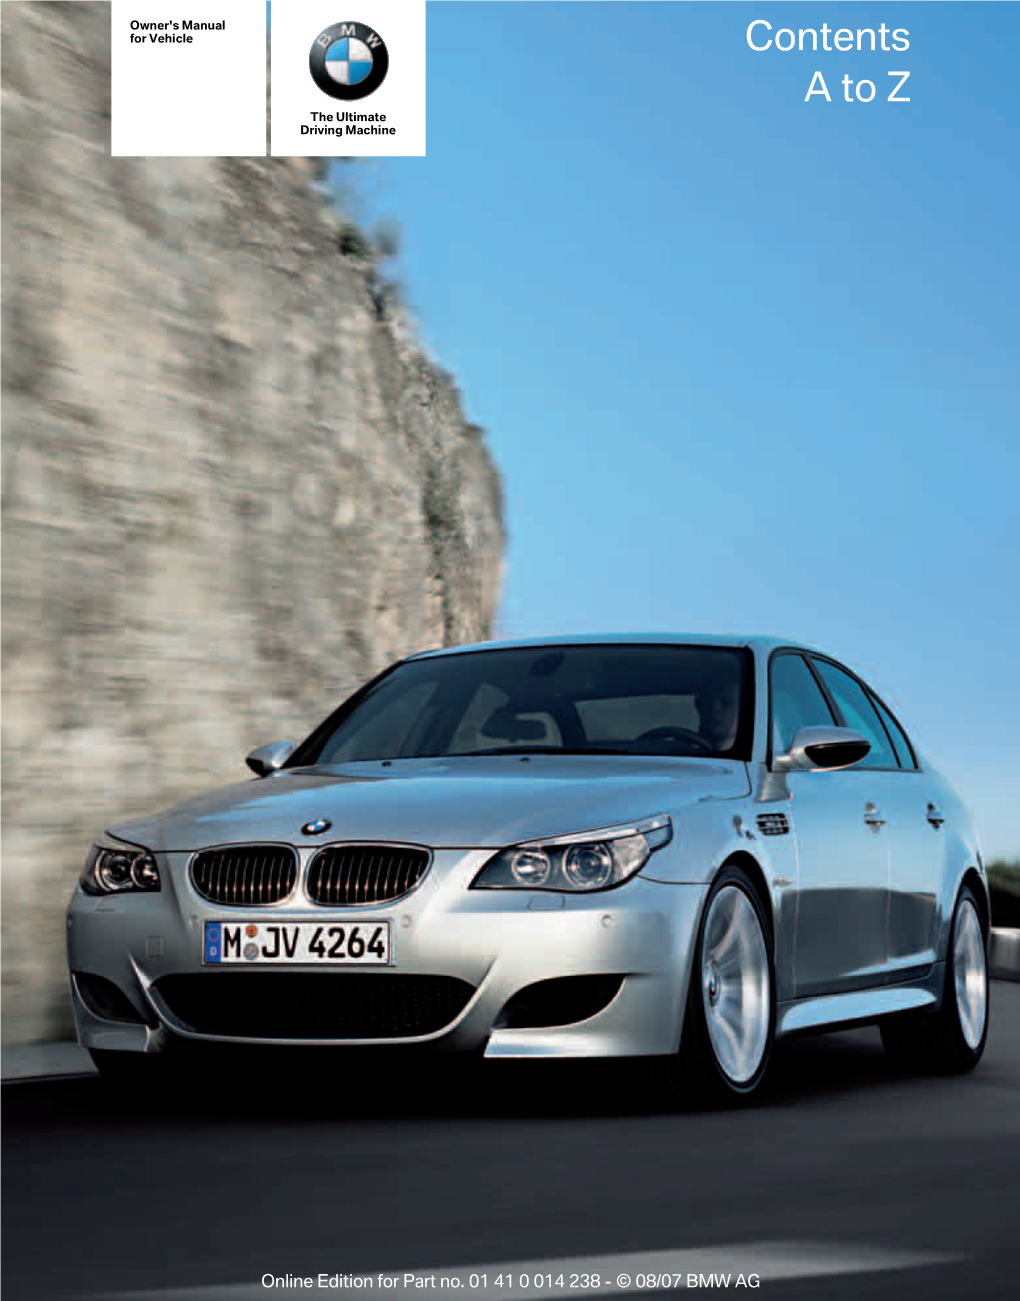 2008 M5 Owners Manual